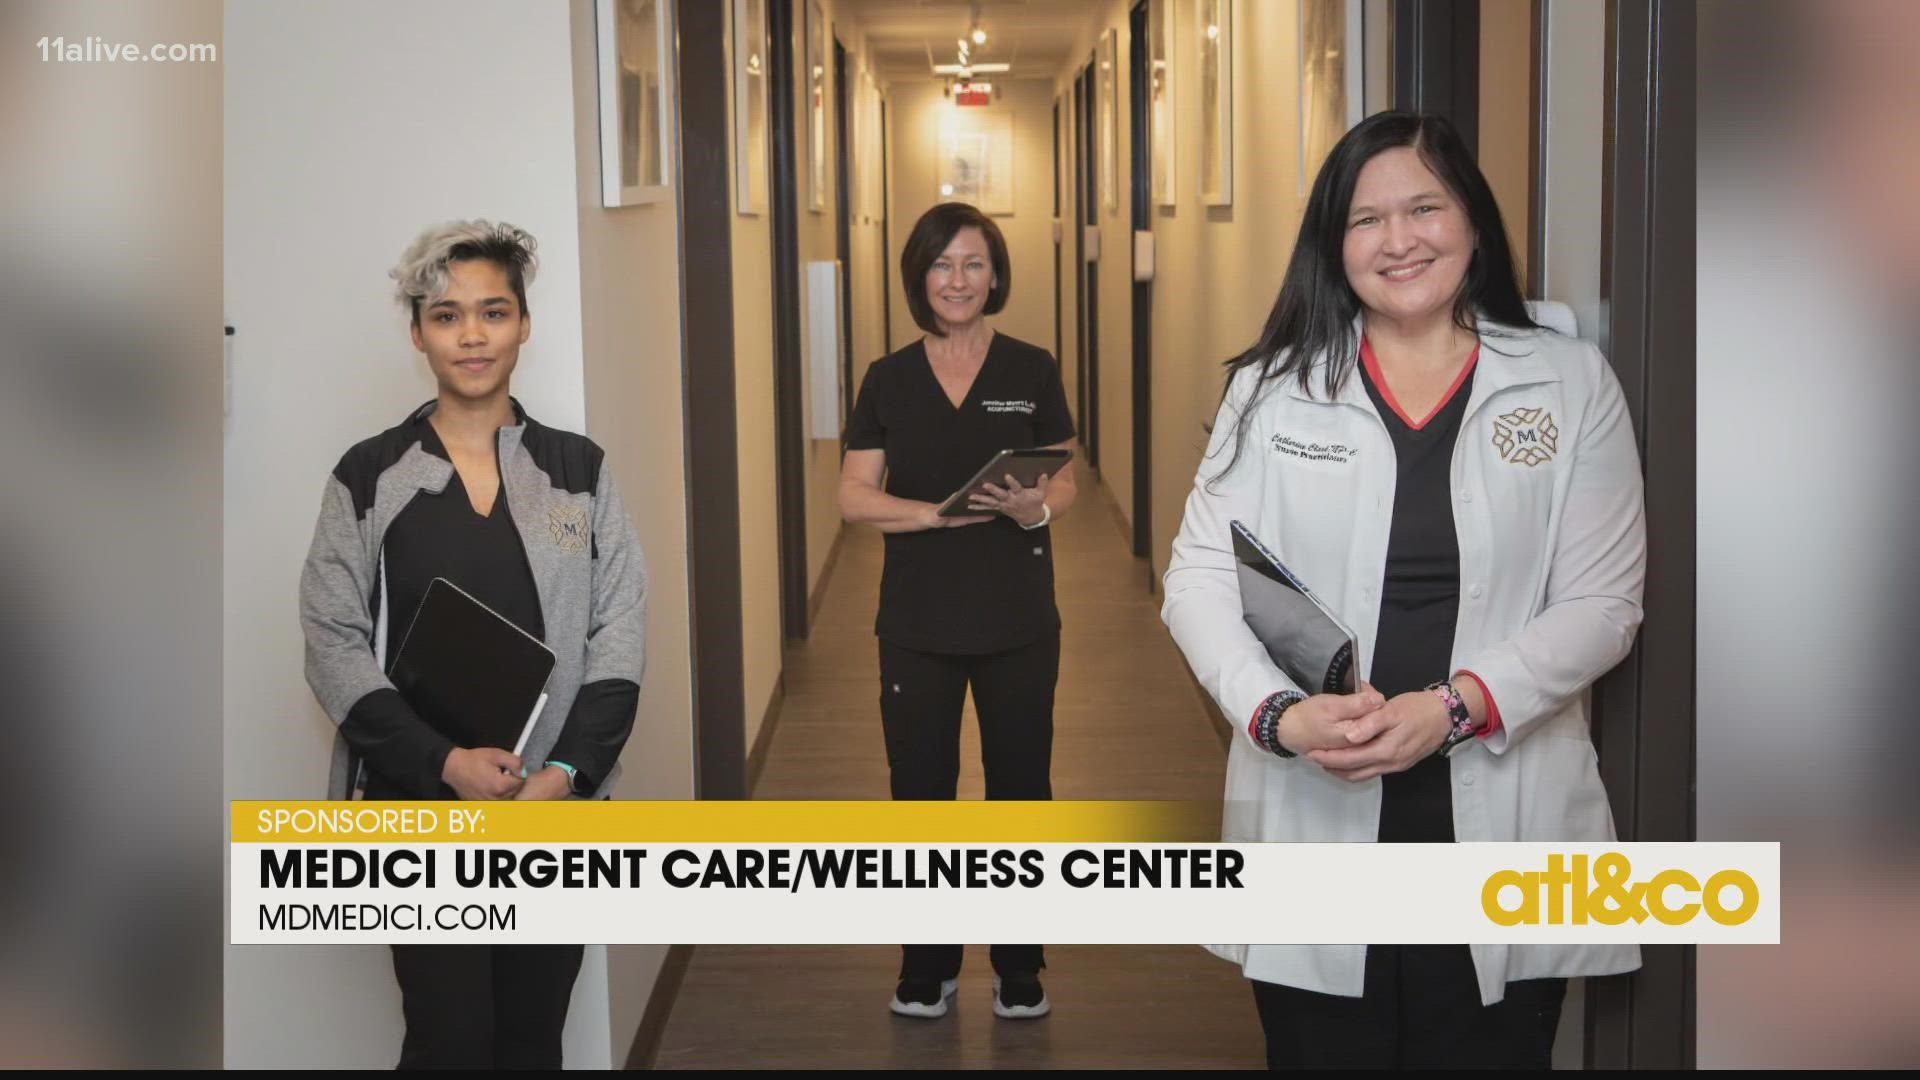 Learn about the holistic and integrative health approach from MEDICI Urgent Care and Wellness Center.